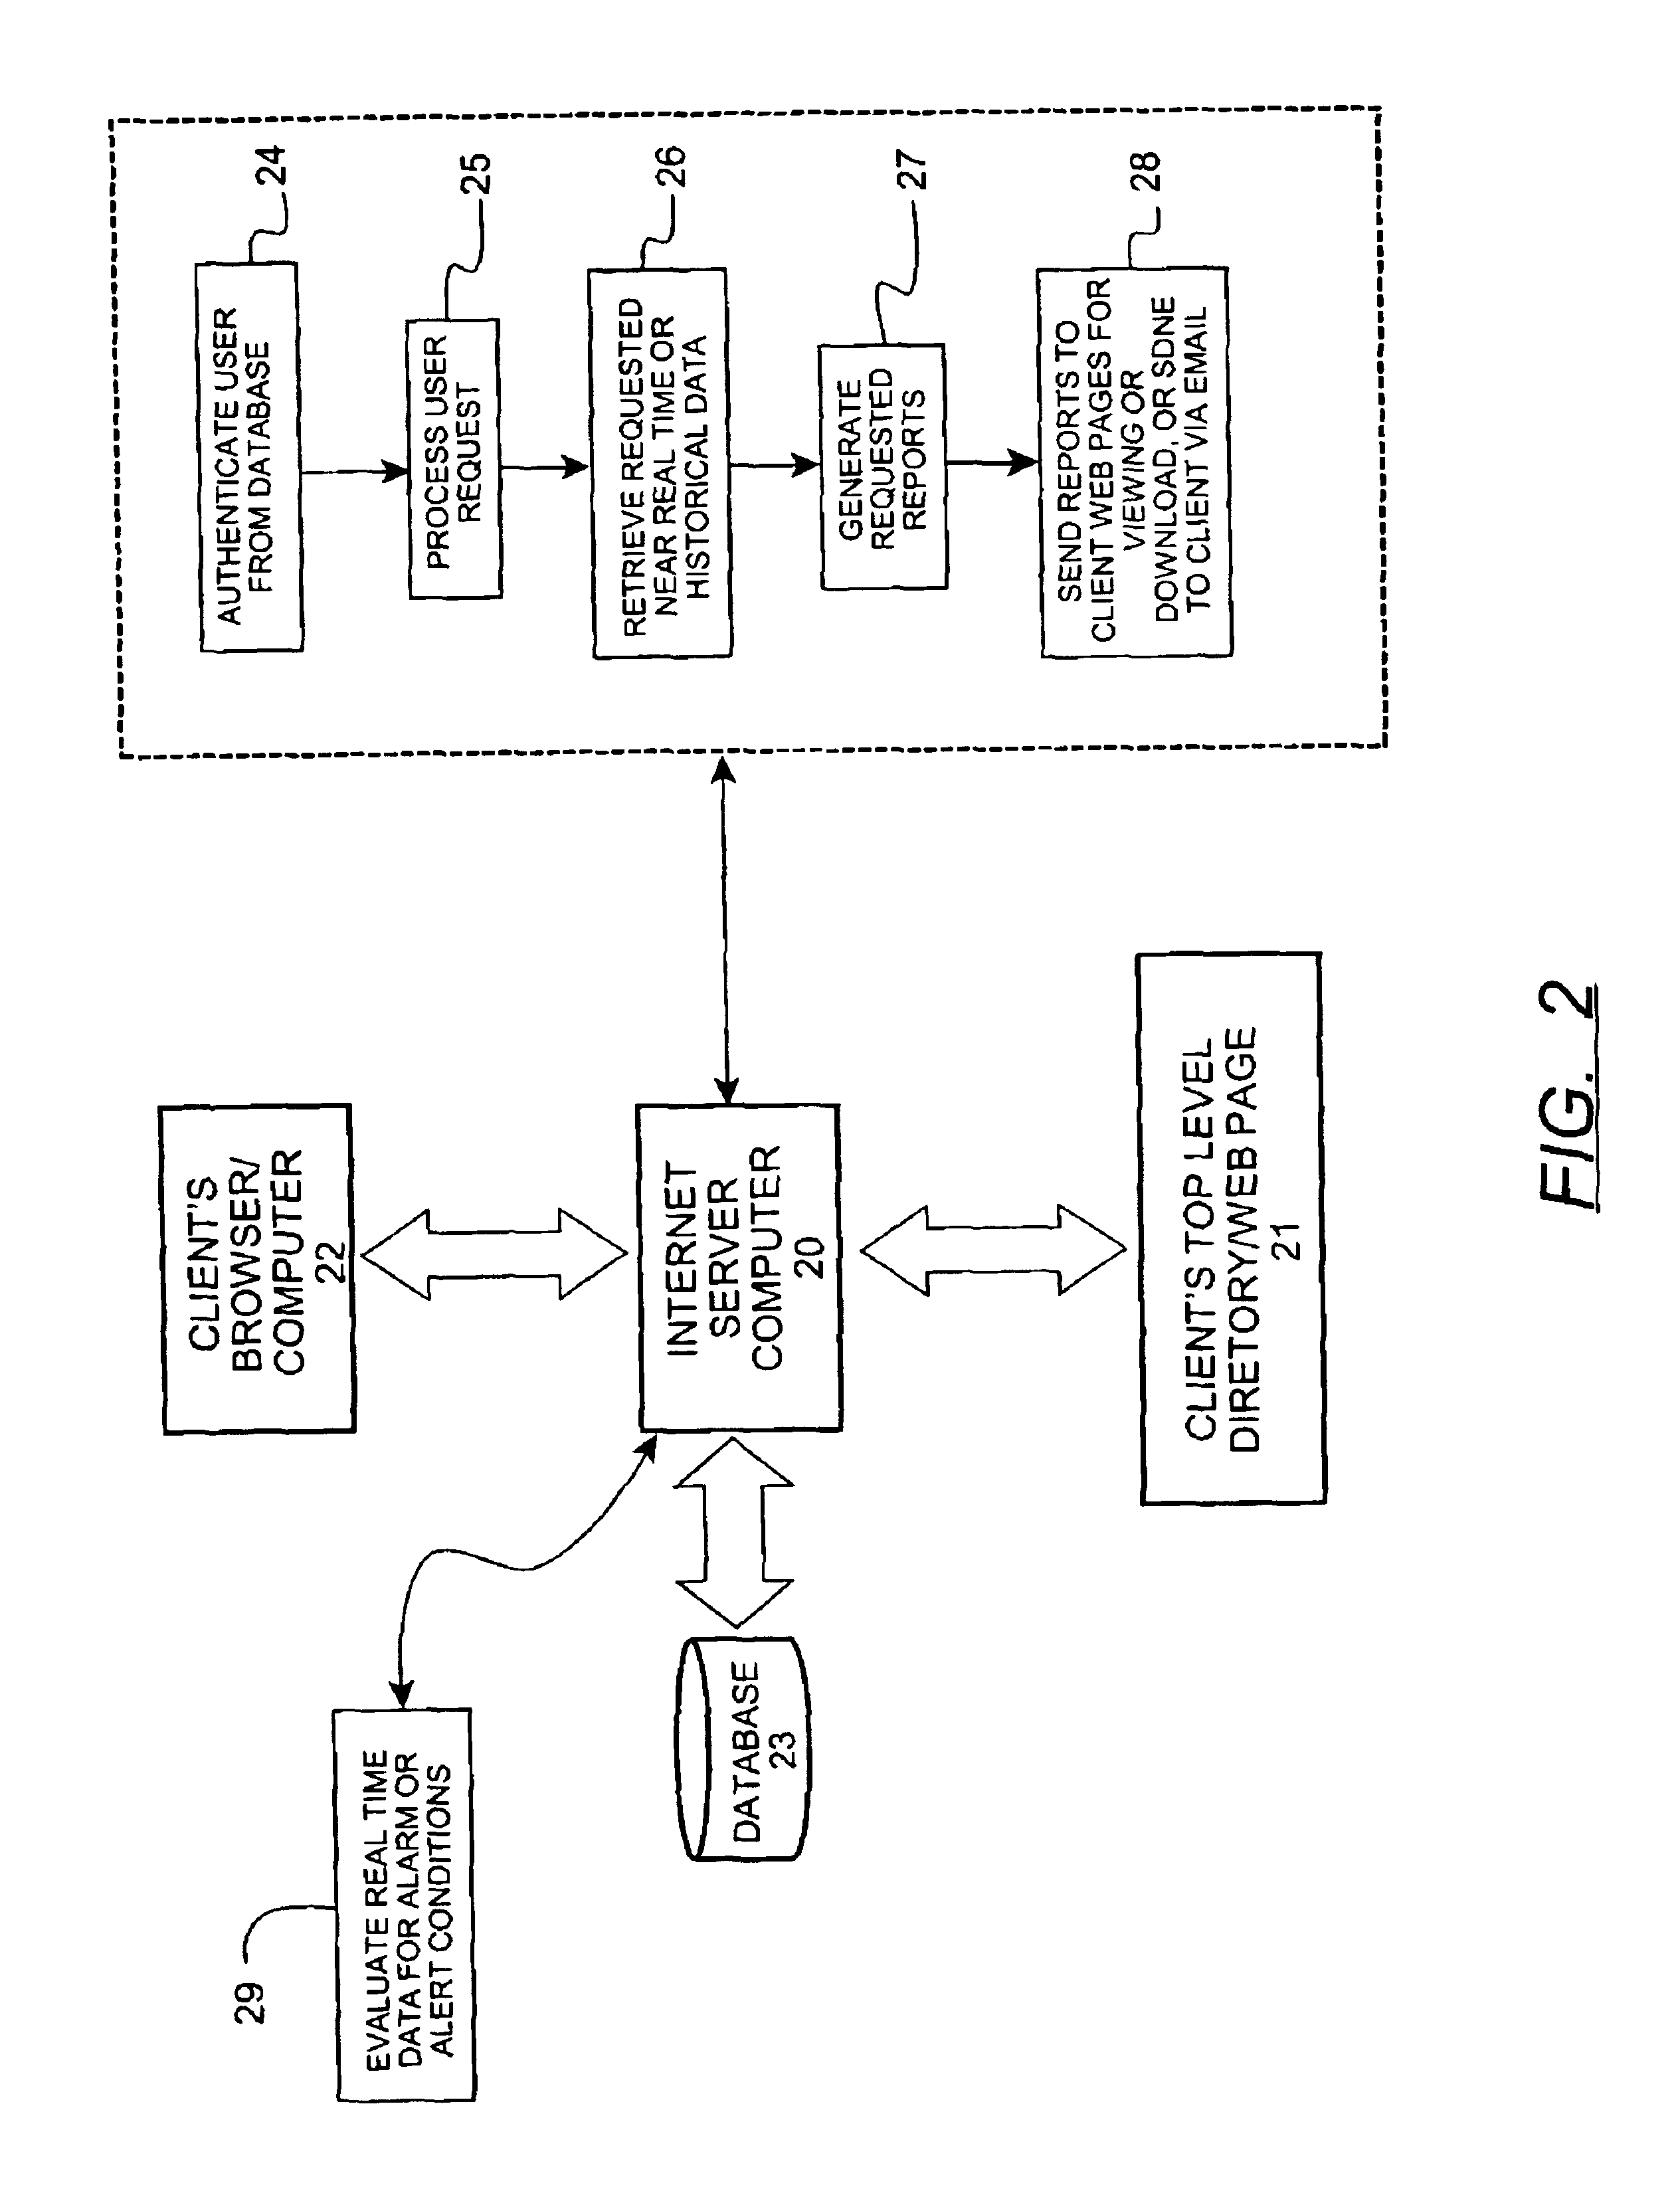 Method for remote monitoring of water treatment systems